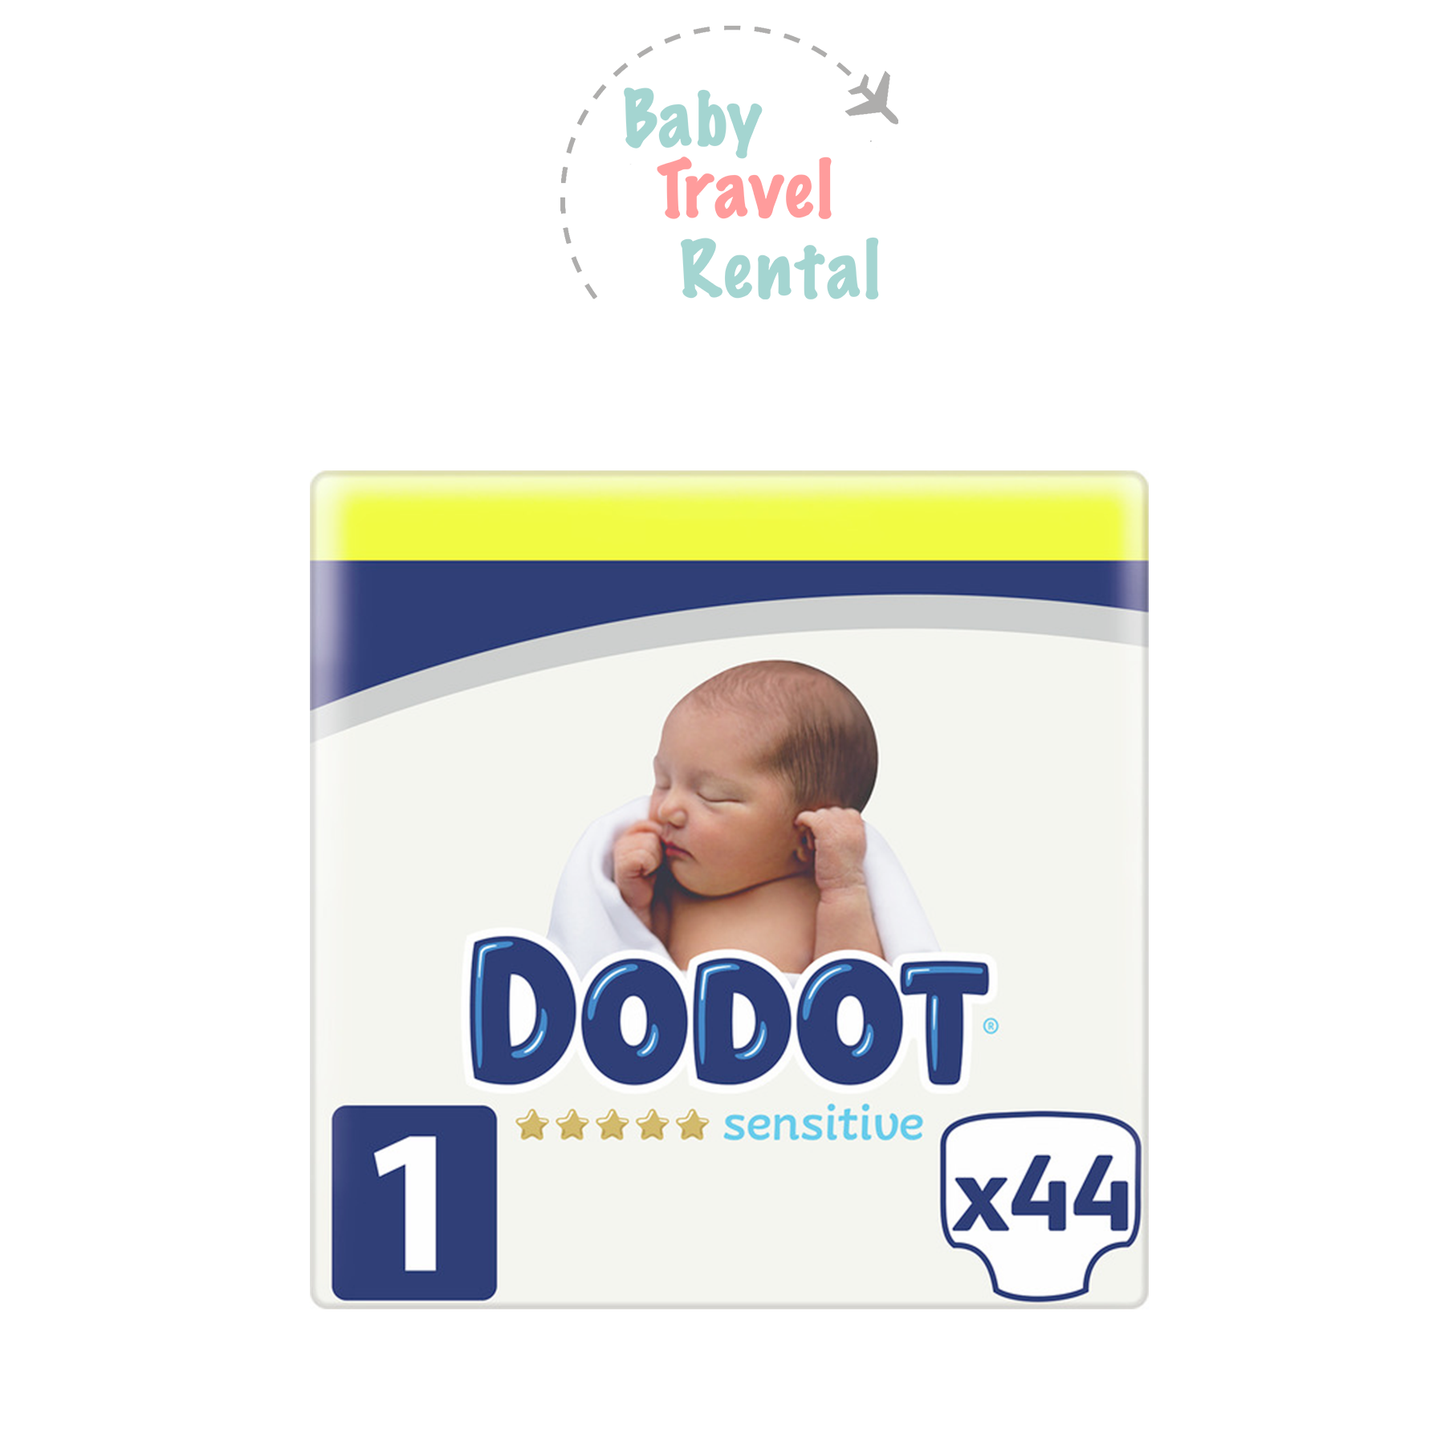 Dodot Sensitive diapers, size 1, 80 diapers, 2-5kg-Size 2, 88 diapers, 4-8kg,  baby, absorbent layer - AliExpress